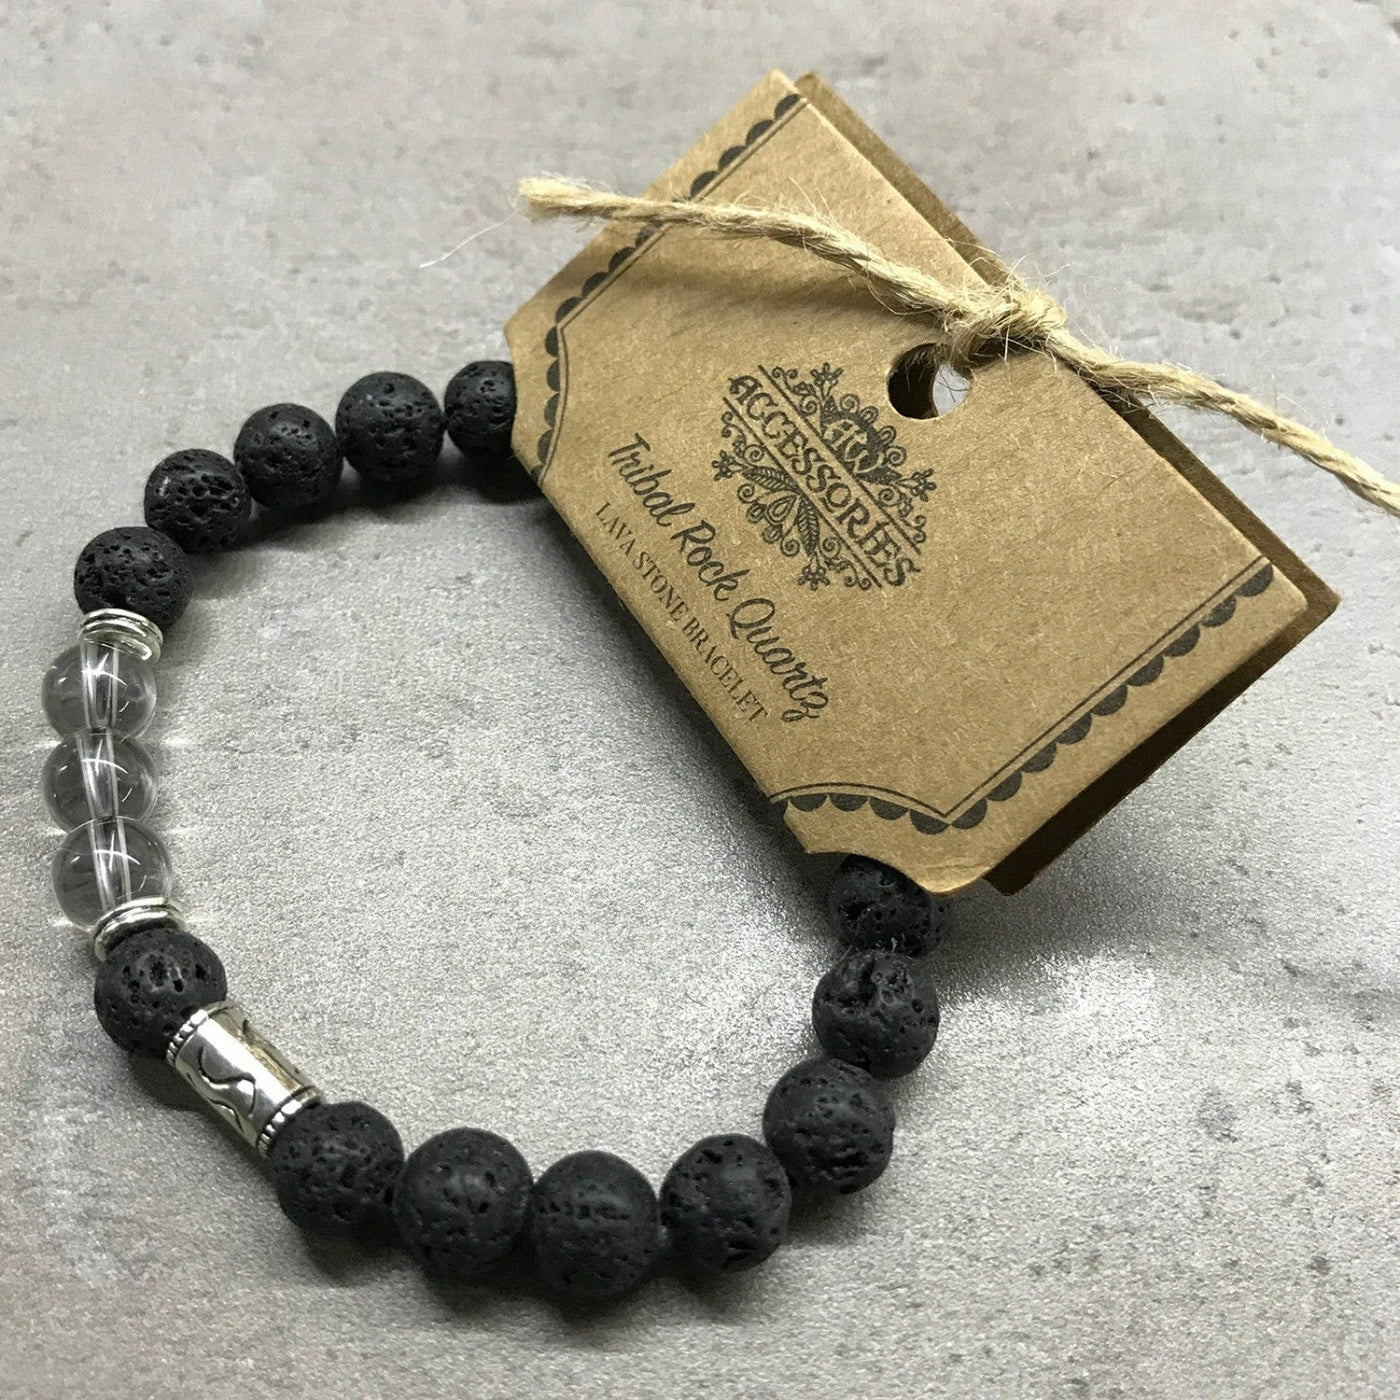 Silver Solar System Lava Stone Women's Bracelet With Beads And Gemstones.